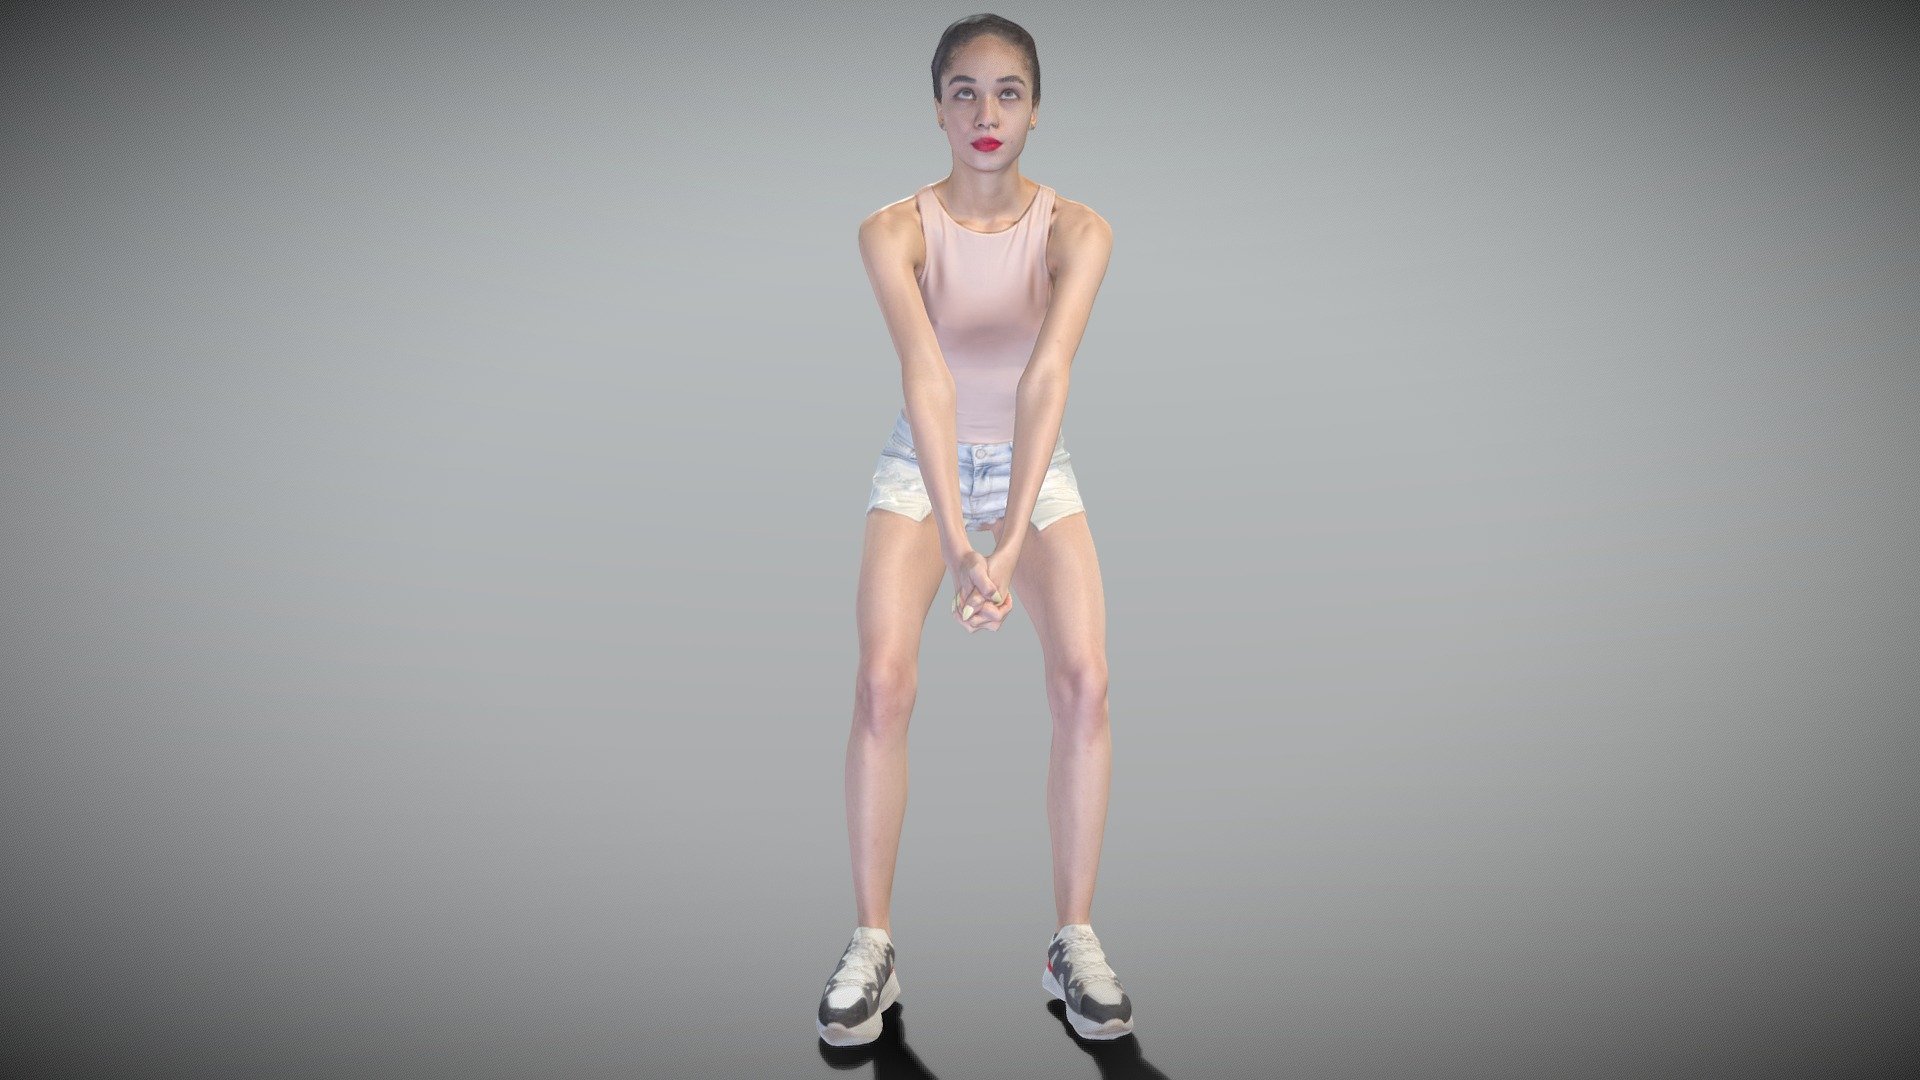 slim woman playing beach volleyball 196 - buy royalty free 3d model deep3dstudio 12a5a22 true human size detailed sporty beautiful young caucasian appearance casual style captured pose perfectly matching variety architectural visualizations eg swimming pool etc product ready immediate use visualisations further render sculpting zbrush technical characteristics digital double scan decimated 100k triangles sufficiently clean pbr textures 8k diffuse normal specular maps non-overlapping uv map download package includes obj file which applicable 3ds max maya cinema 4d unreal engine unity blender more scans released every week everything 3D print model - Mito3D